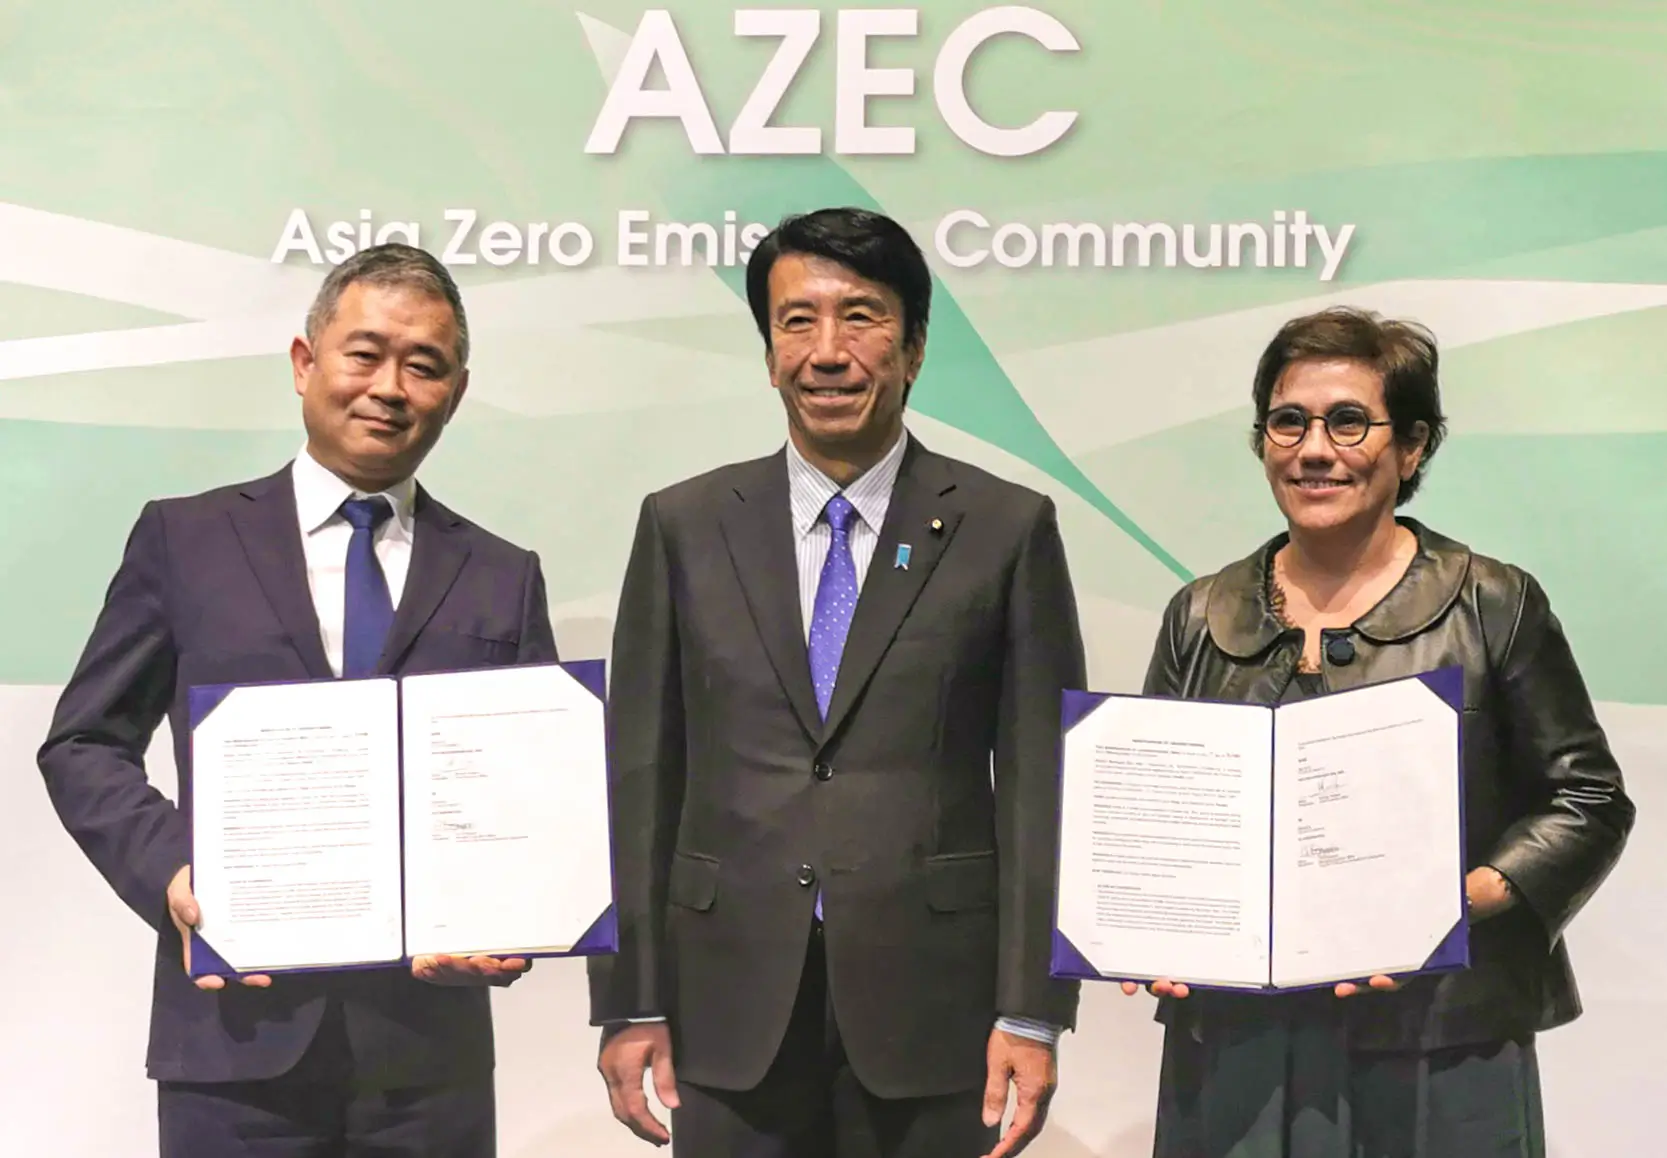 IHI, Gentari sign MoU to develop global green ammonia value chain and commercial demonstration of ammonia-powered gas turbine